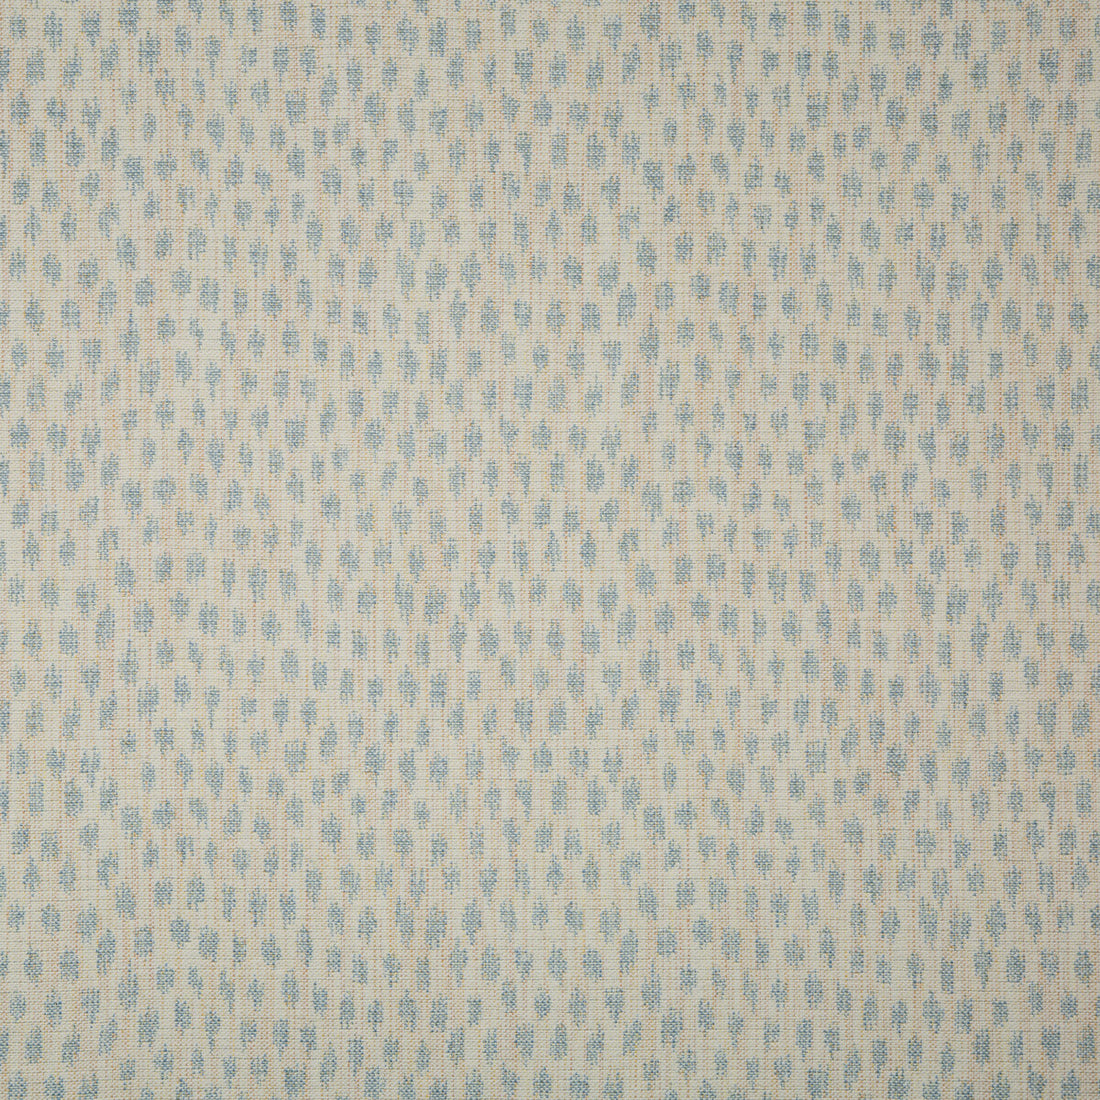 Kemble fabric in sky color - pattern BFC-3683.15.0 - by Lee Jofa in the Blithfield collection